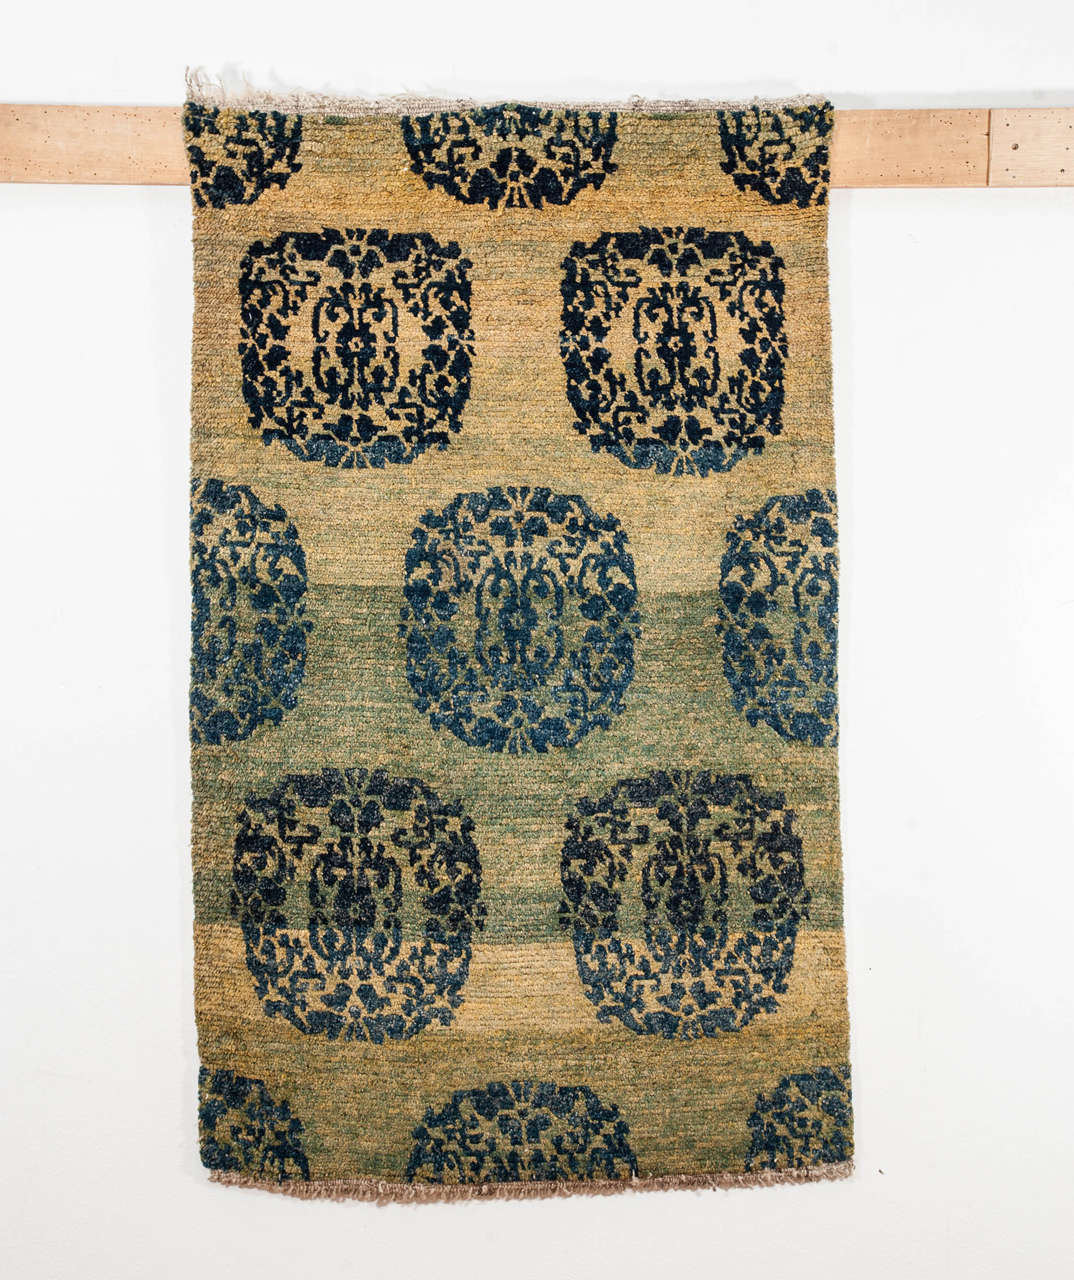 A rare Tibetan rug in the khaden format distinguished by a sea green background decorated by an all-over infinite repeat pattern of roundels composed of conjoined lotus flowers.
The silky quality of the Himalayan wool and the excellent condition